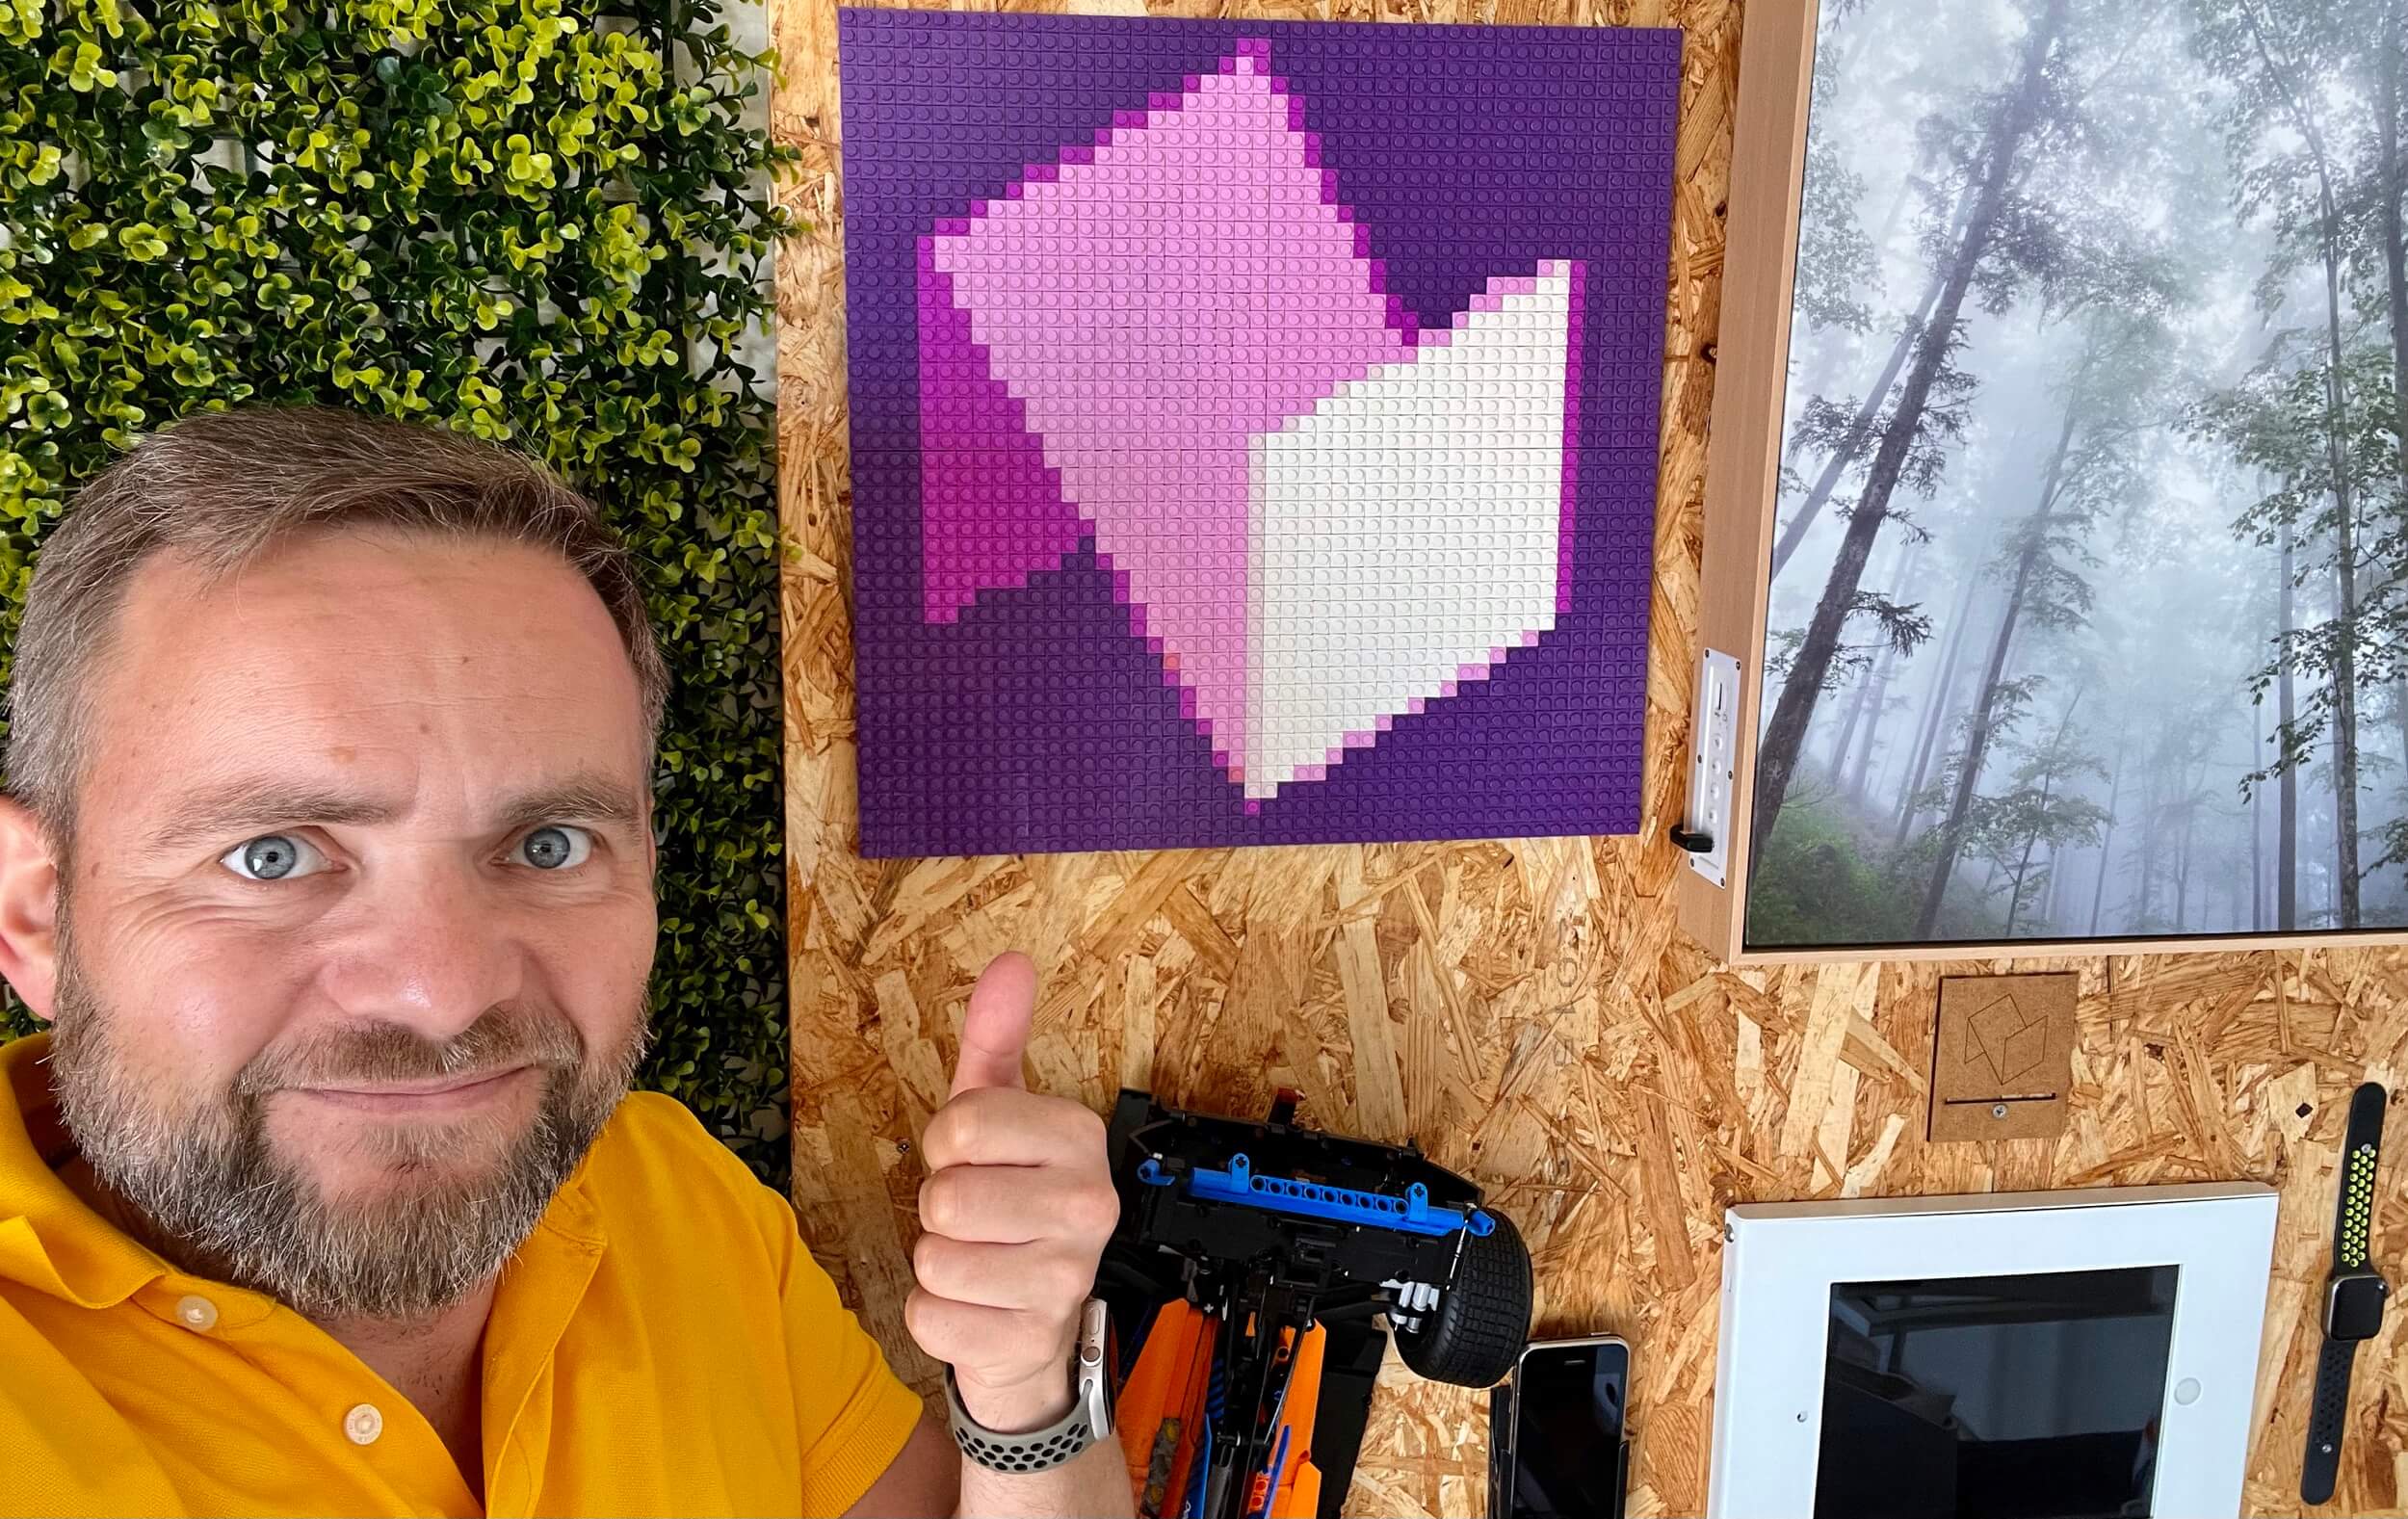 Nozbe logo as a Lego mosaic - a fantastic gift from Augusto Pinaud!